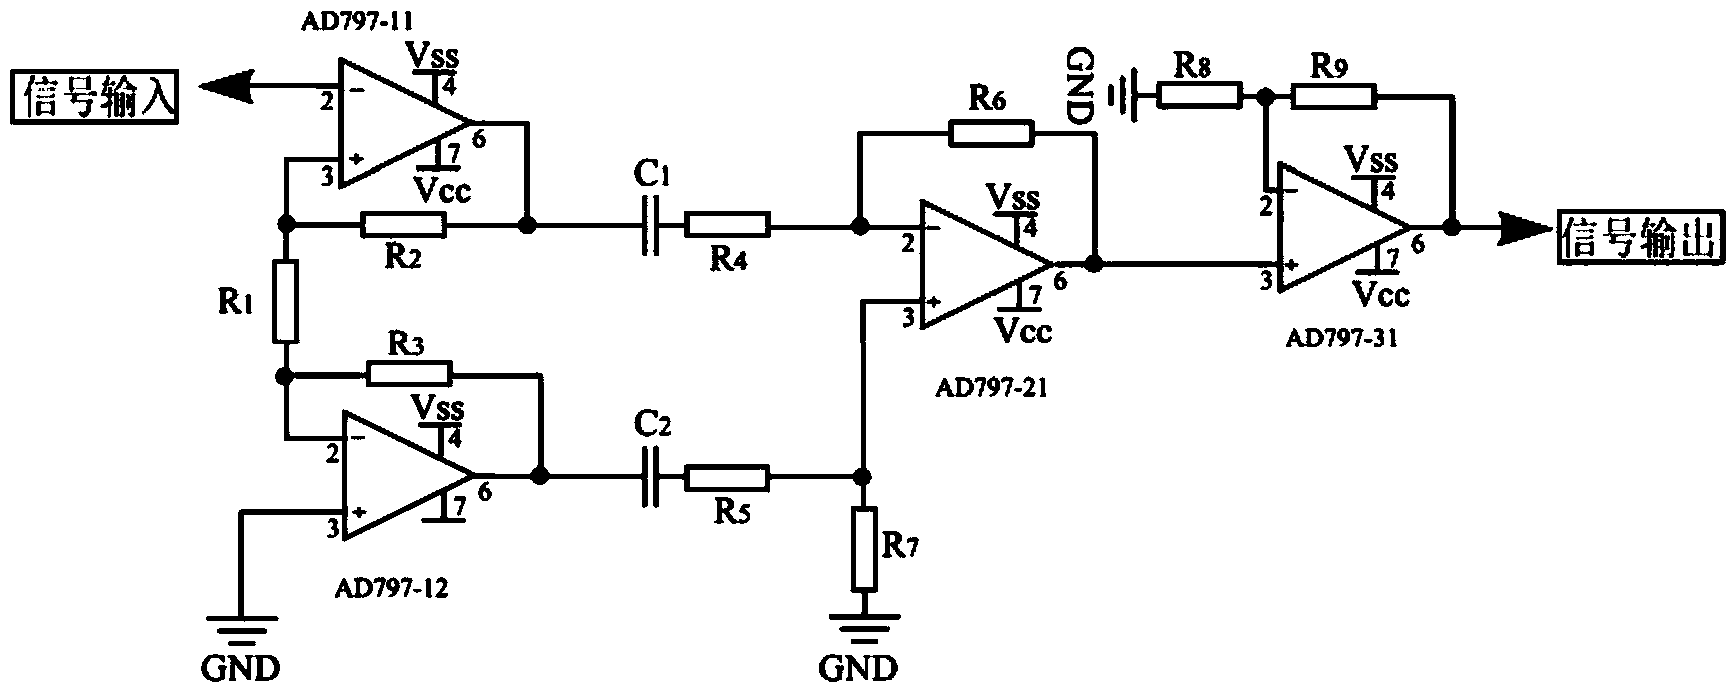 Wideband and low-noise differential application circuit for measuring weak signal